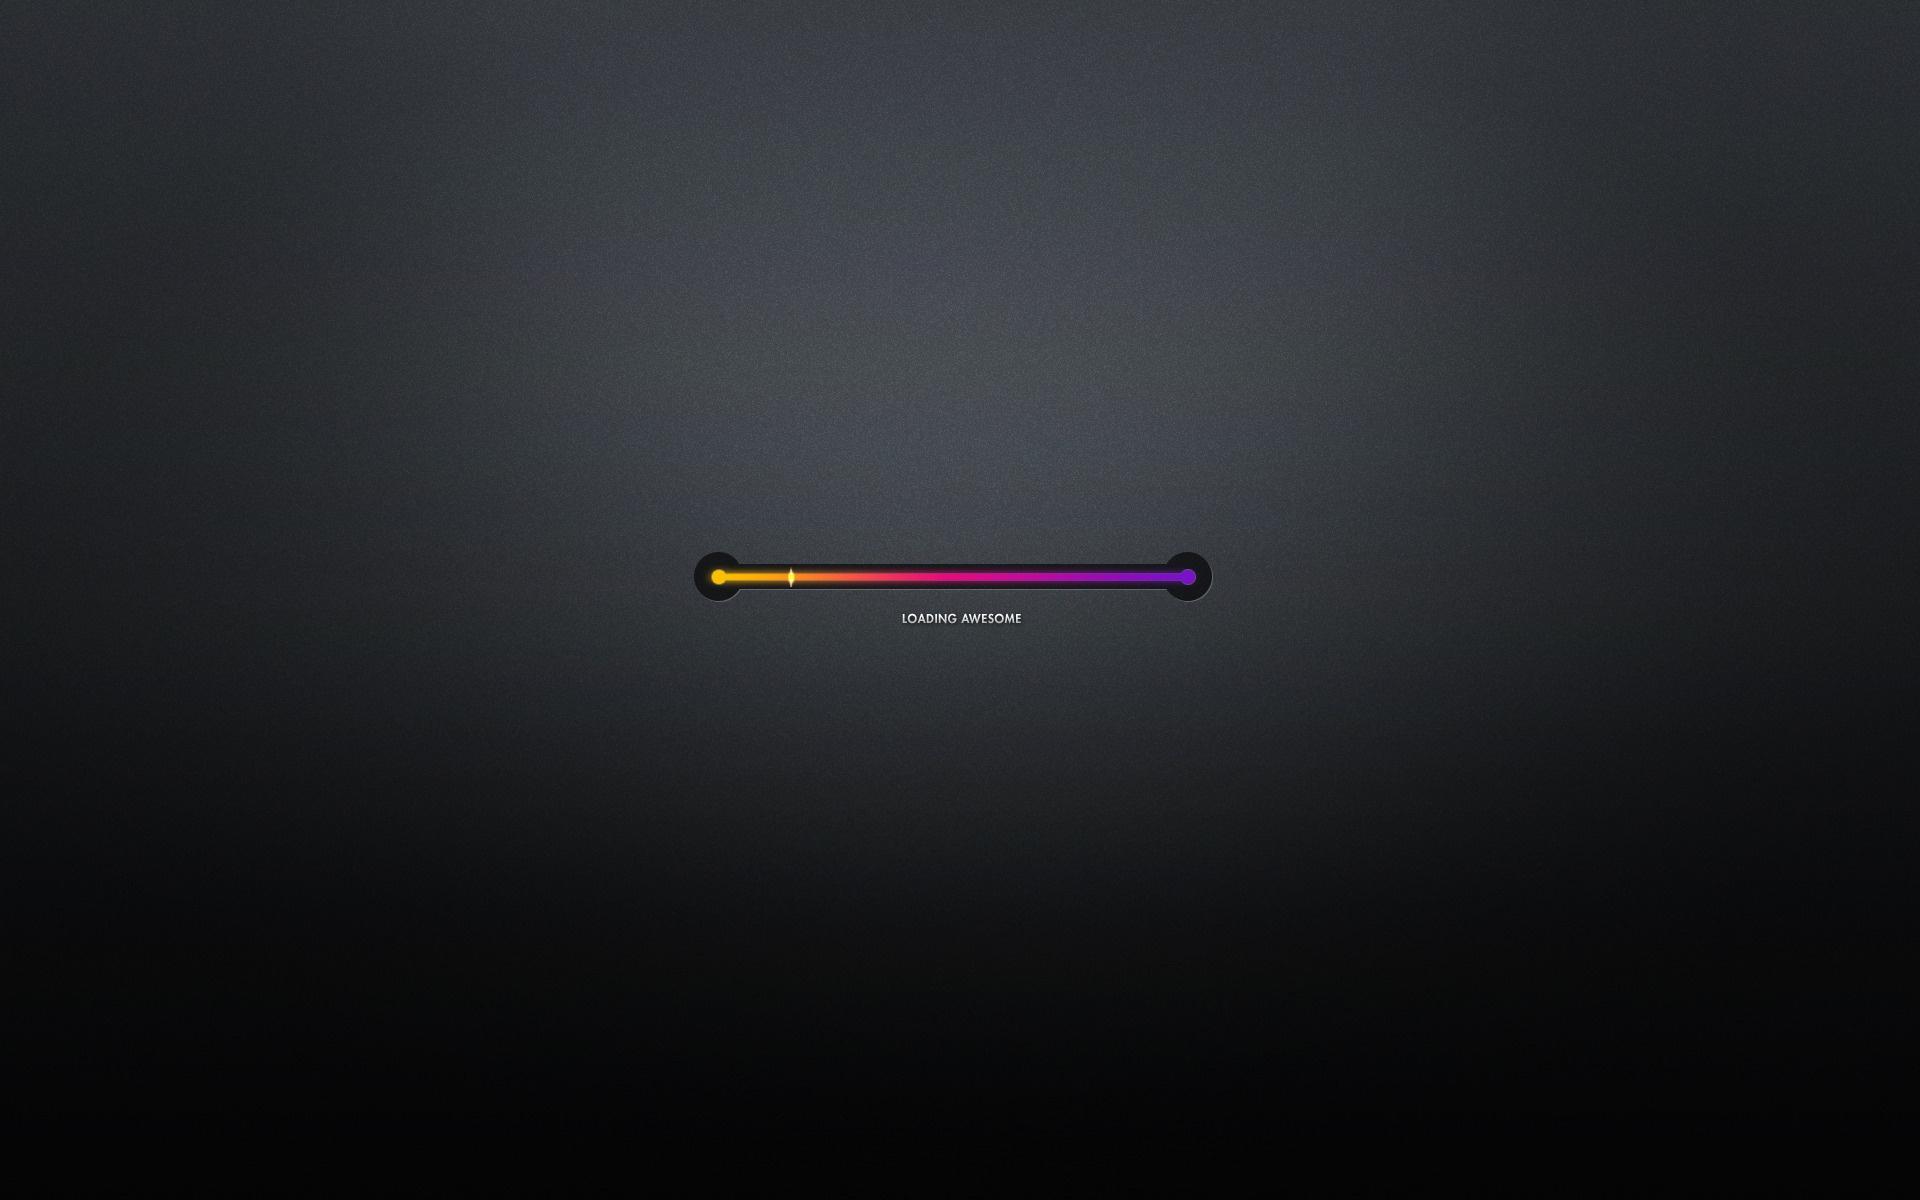 Wallpaper Loading awesome, loading, simple, graphics desktop